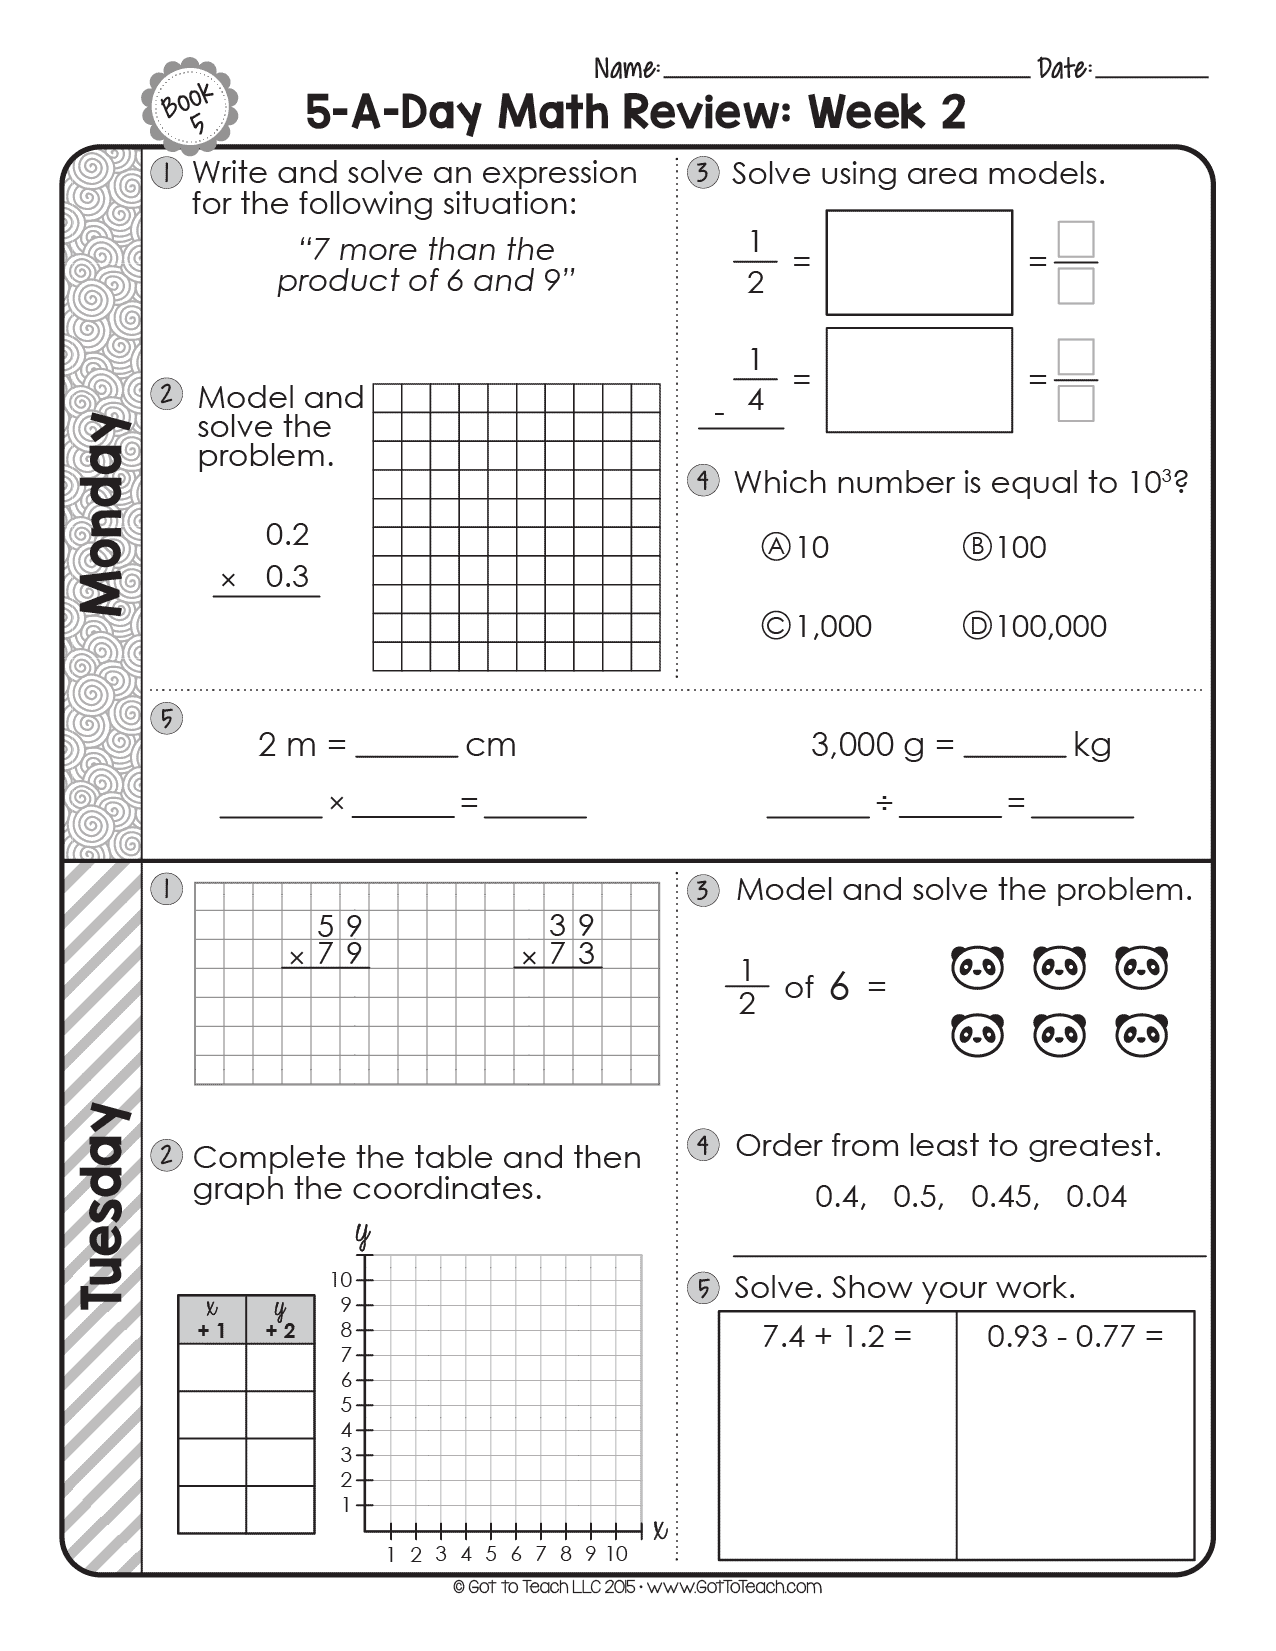 Weekly Math Review Q2 3 Answer Key 5th Grade